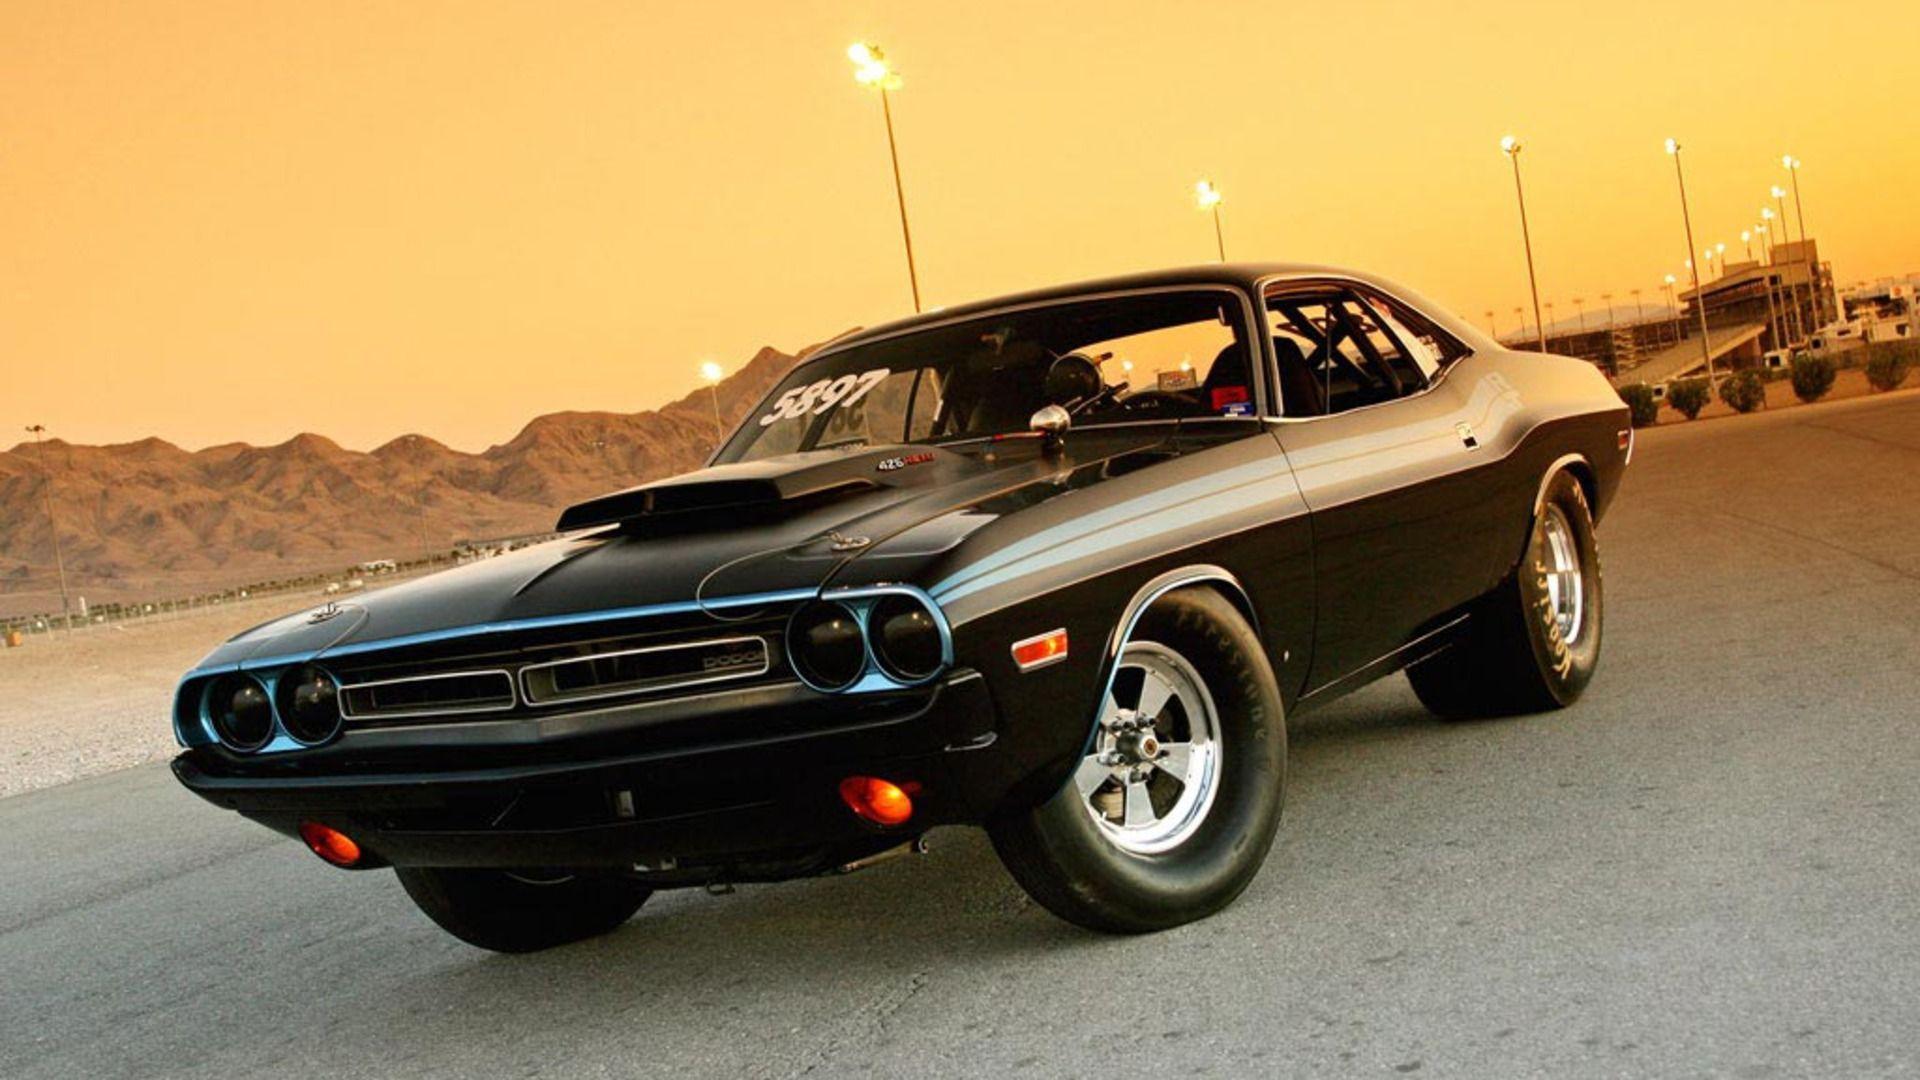 Muscle car wallpapers hd 1080p